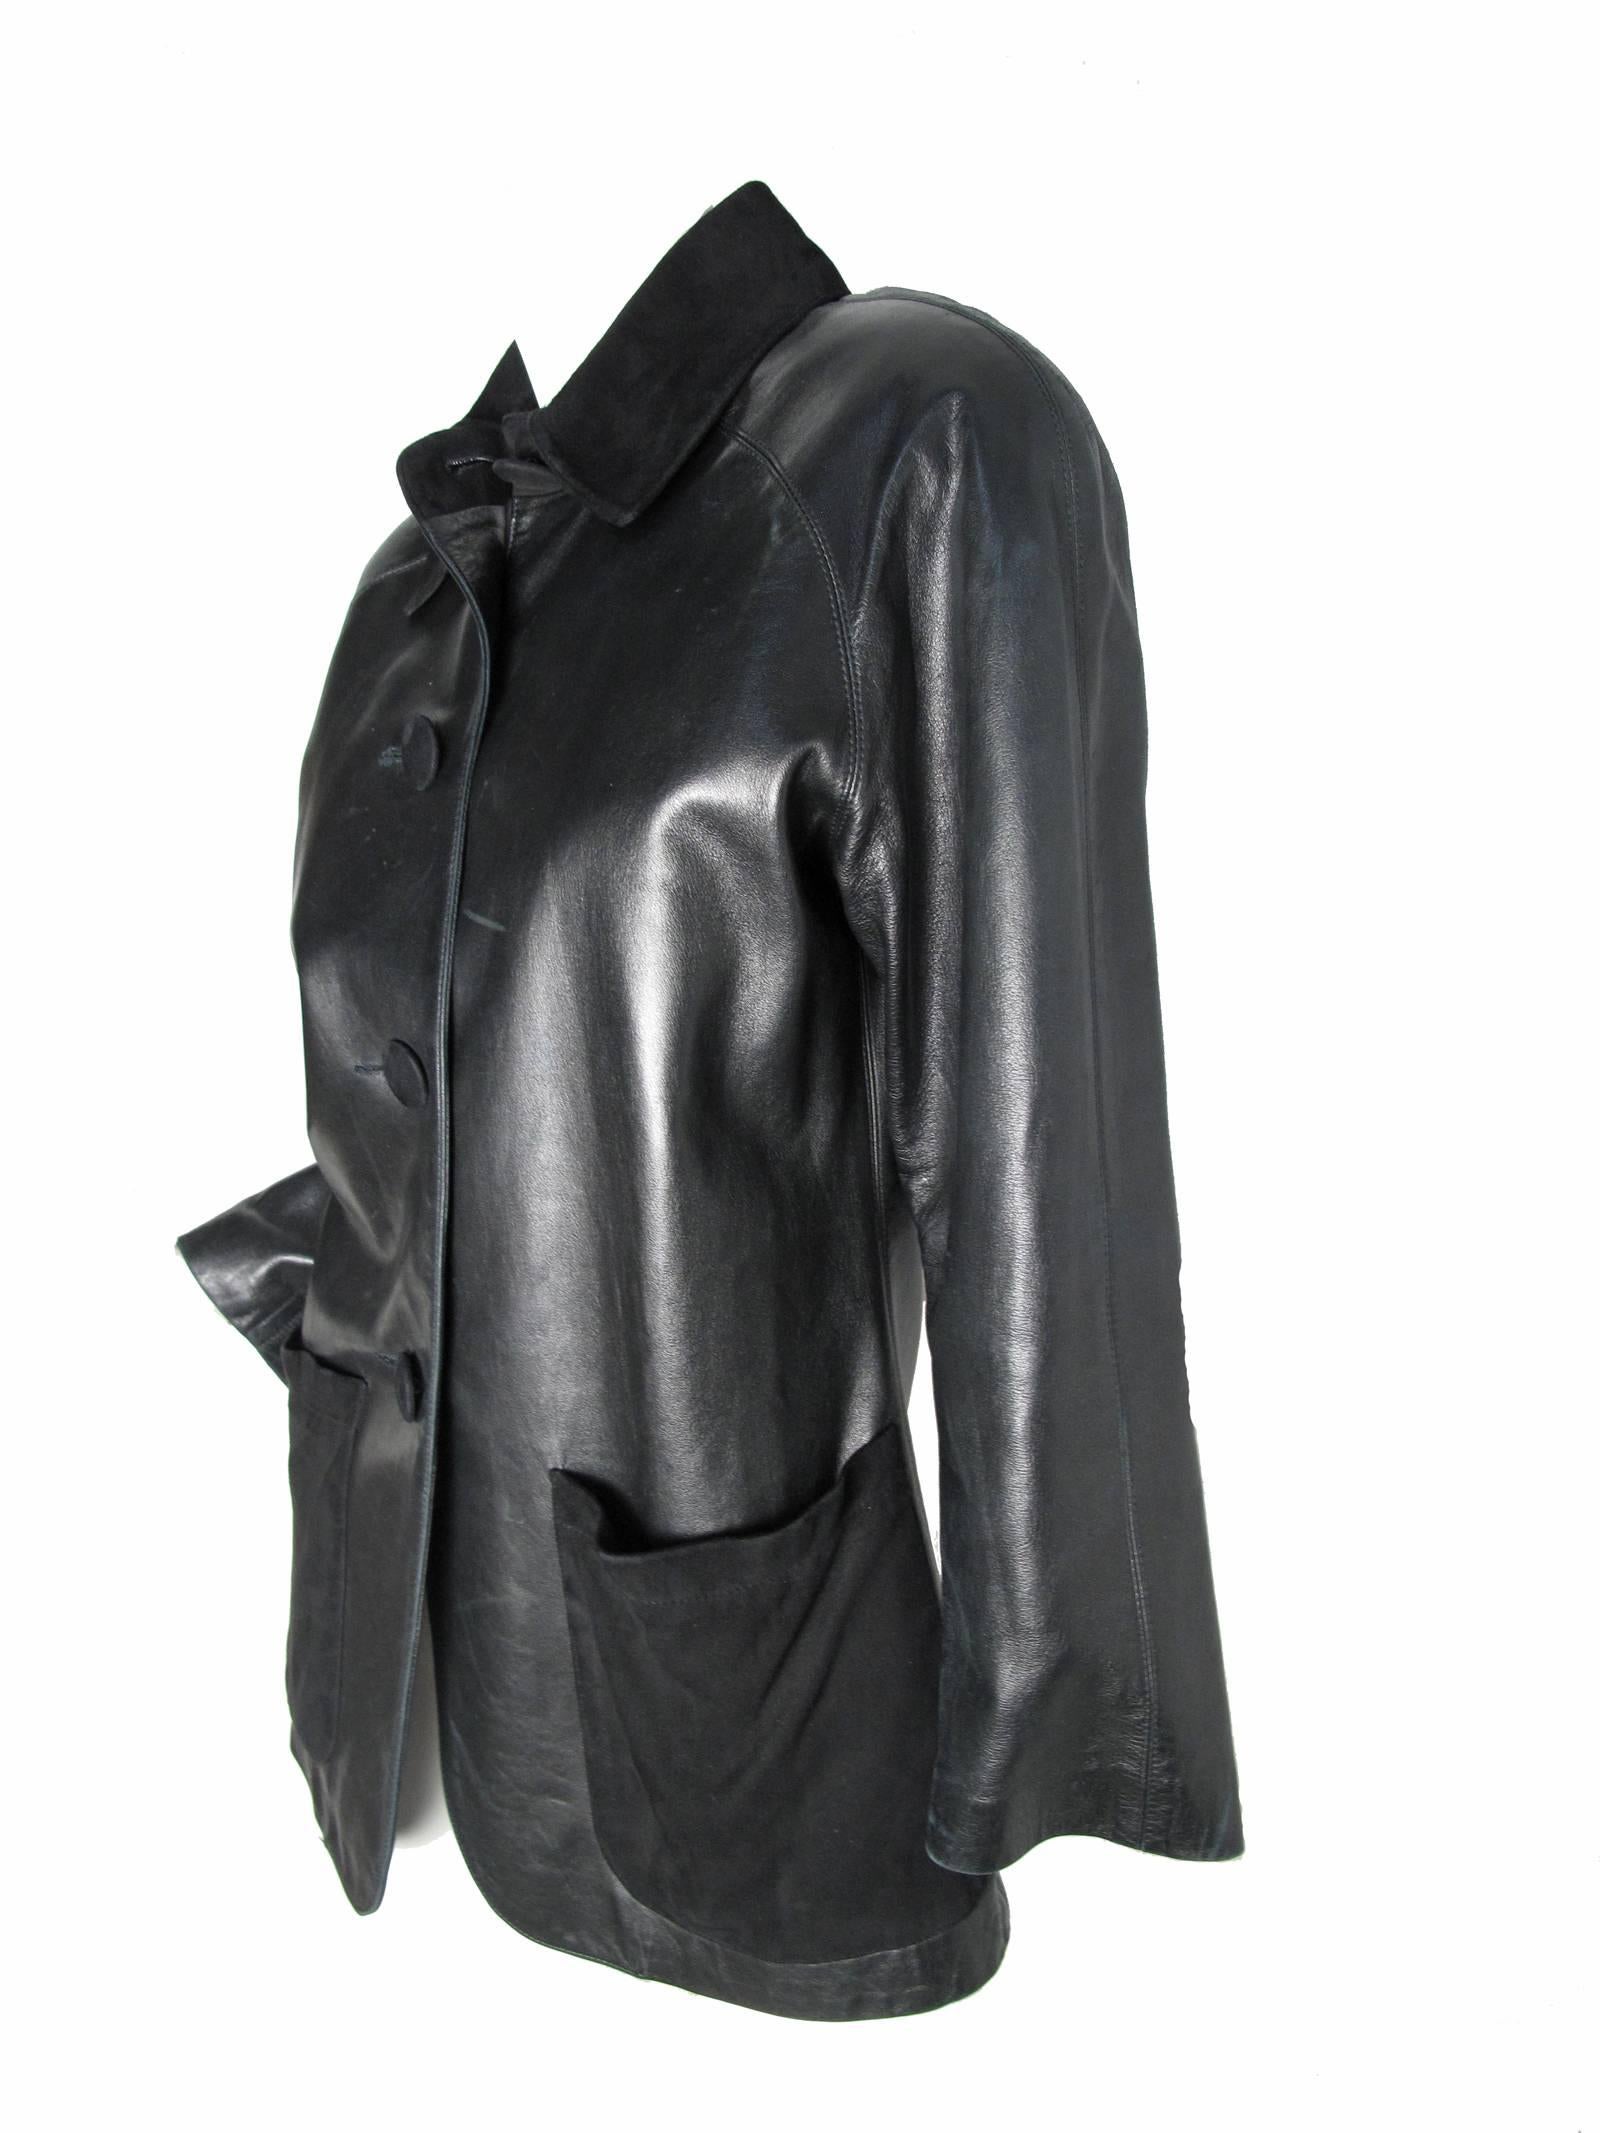 Yves Saint Laurent black leather jacket with suede collar and pockets.  Size 36 
Condition: Good, some all over wear.
38